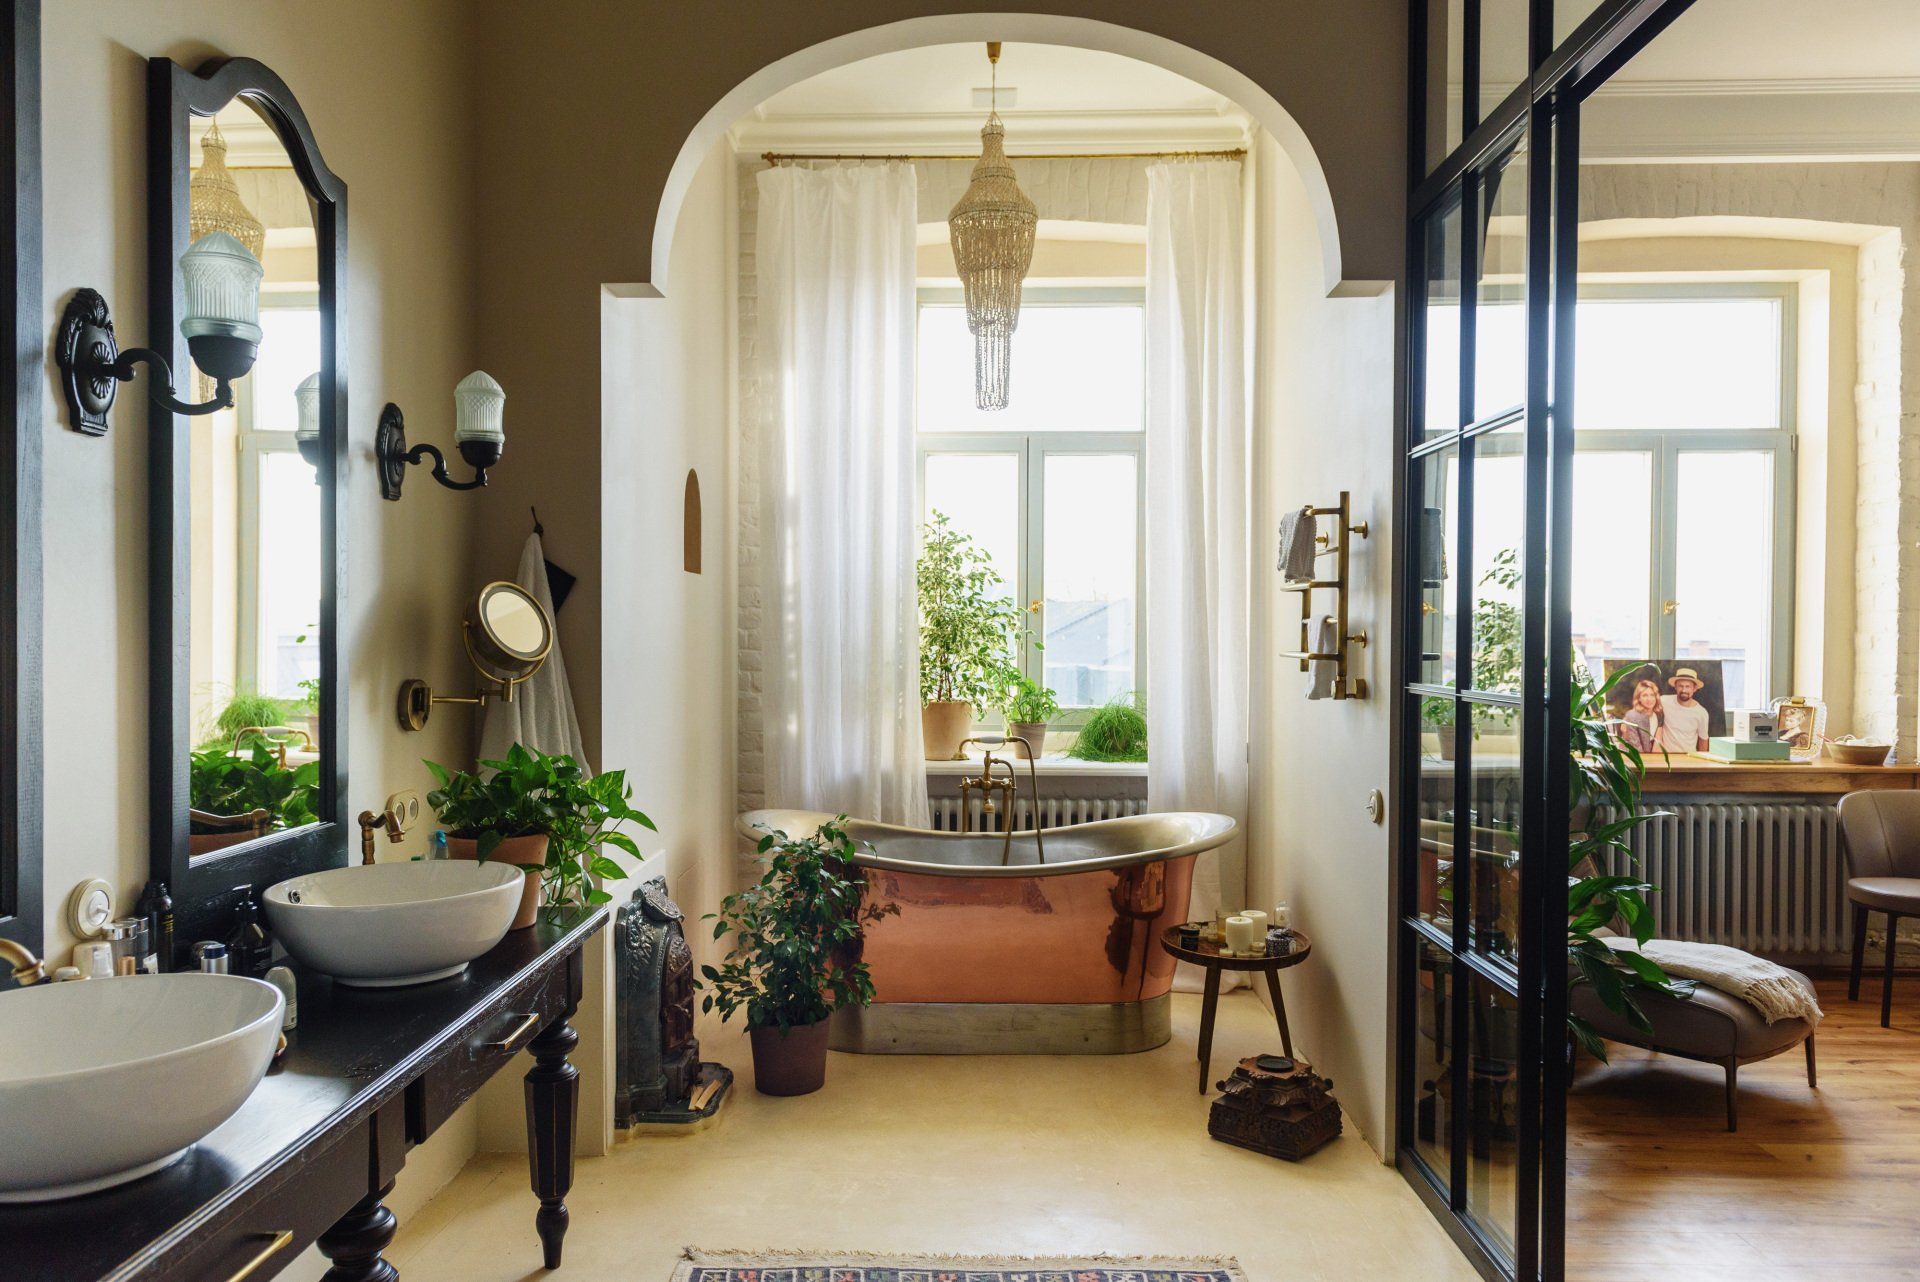 The Value of a Bathroom Remodel - Fancy Bathroom